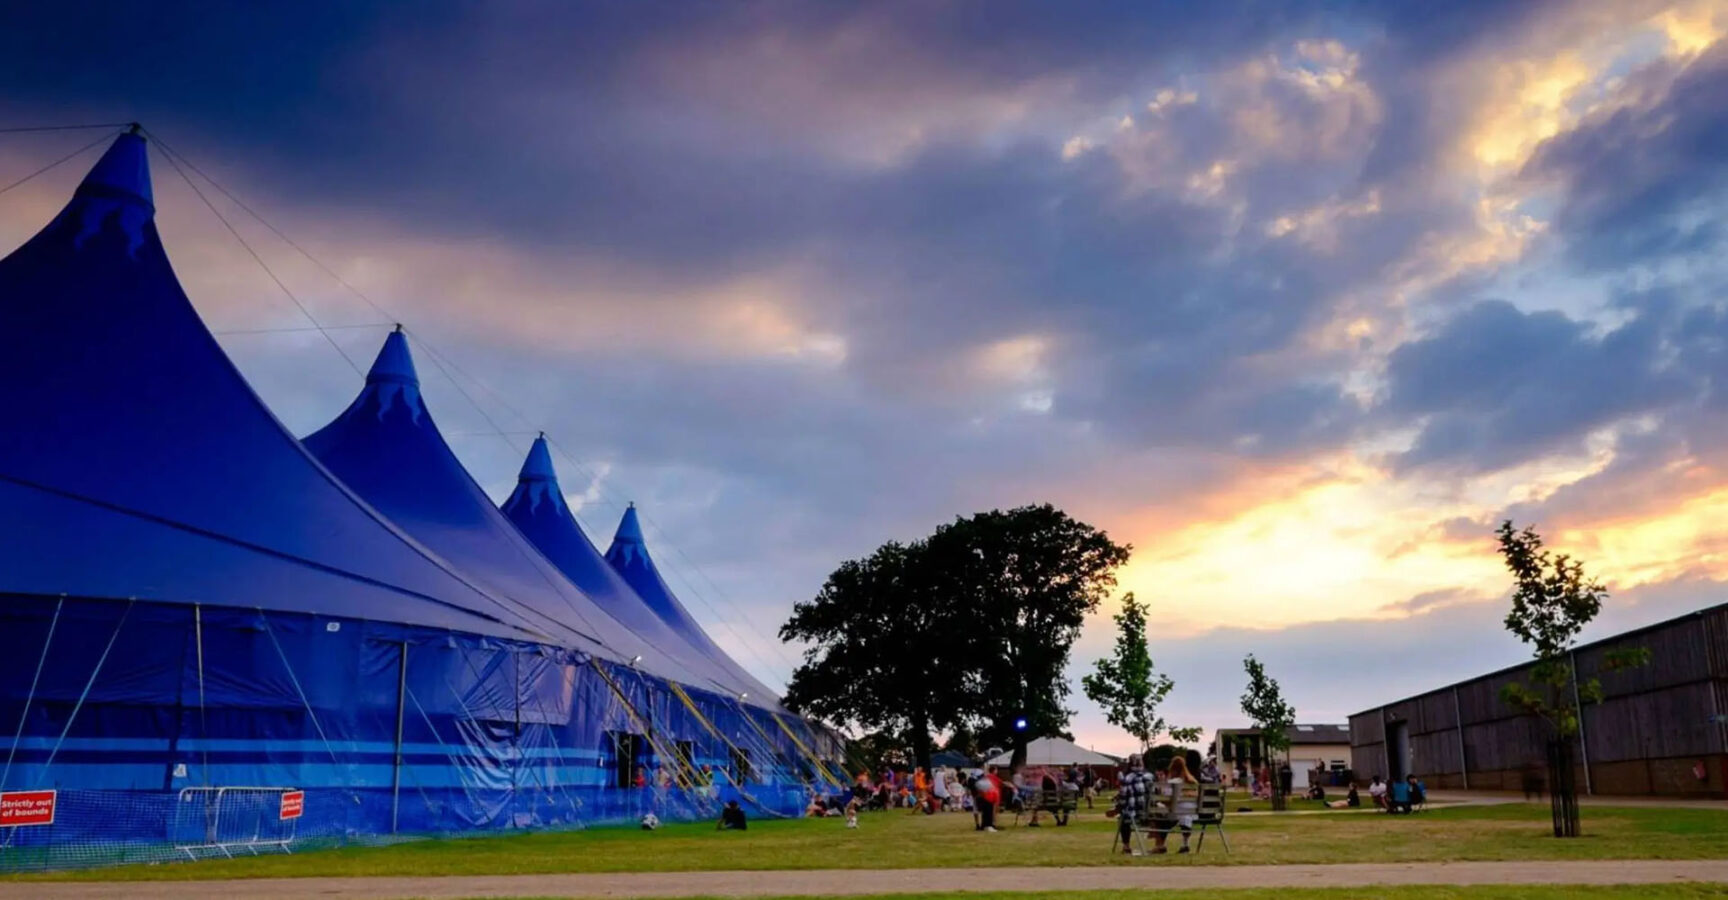 showground with blue tents